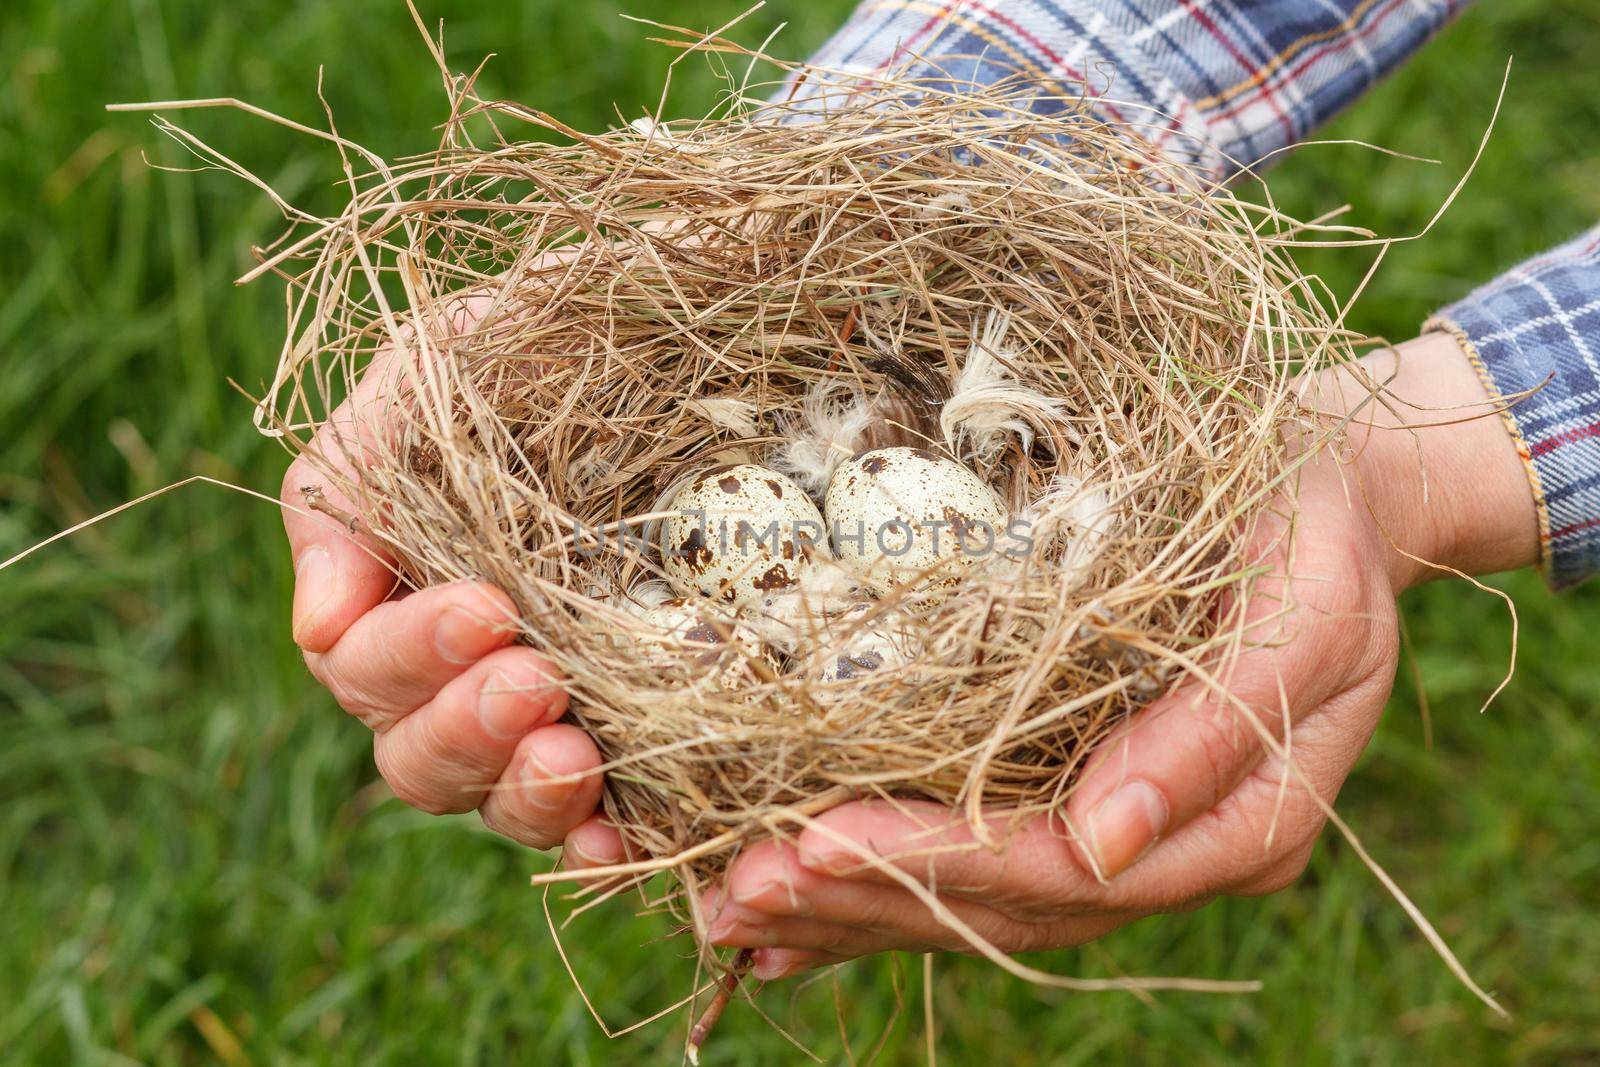 Two hands carefully holding a nest with eggs of quail on green grass background